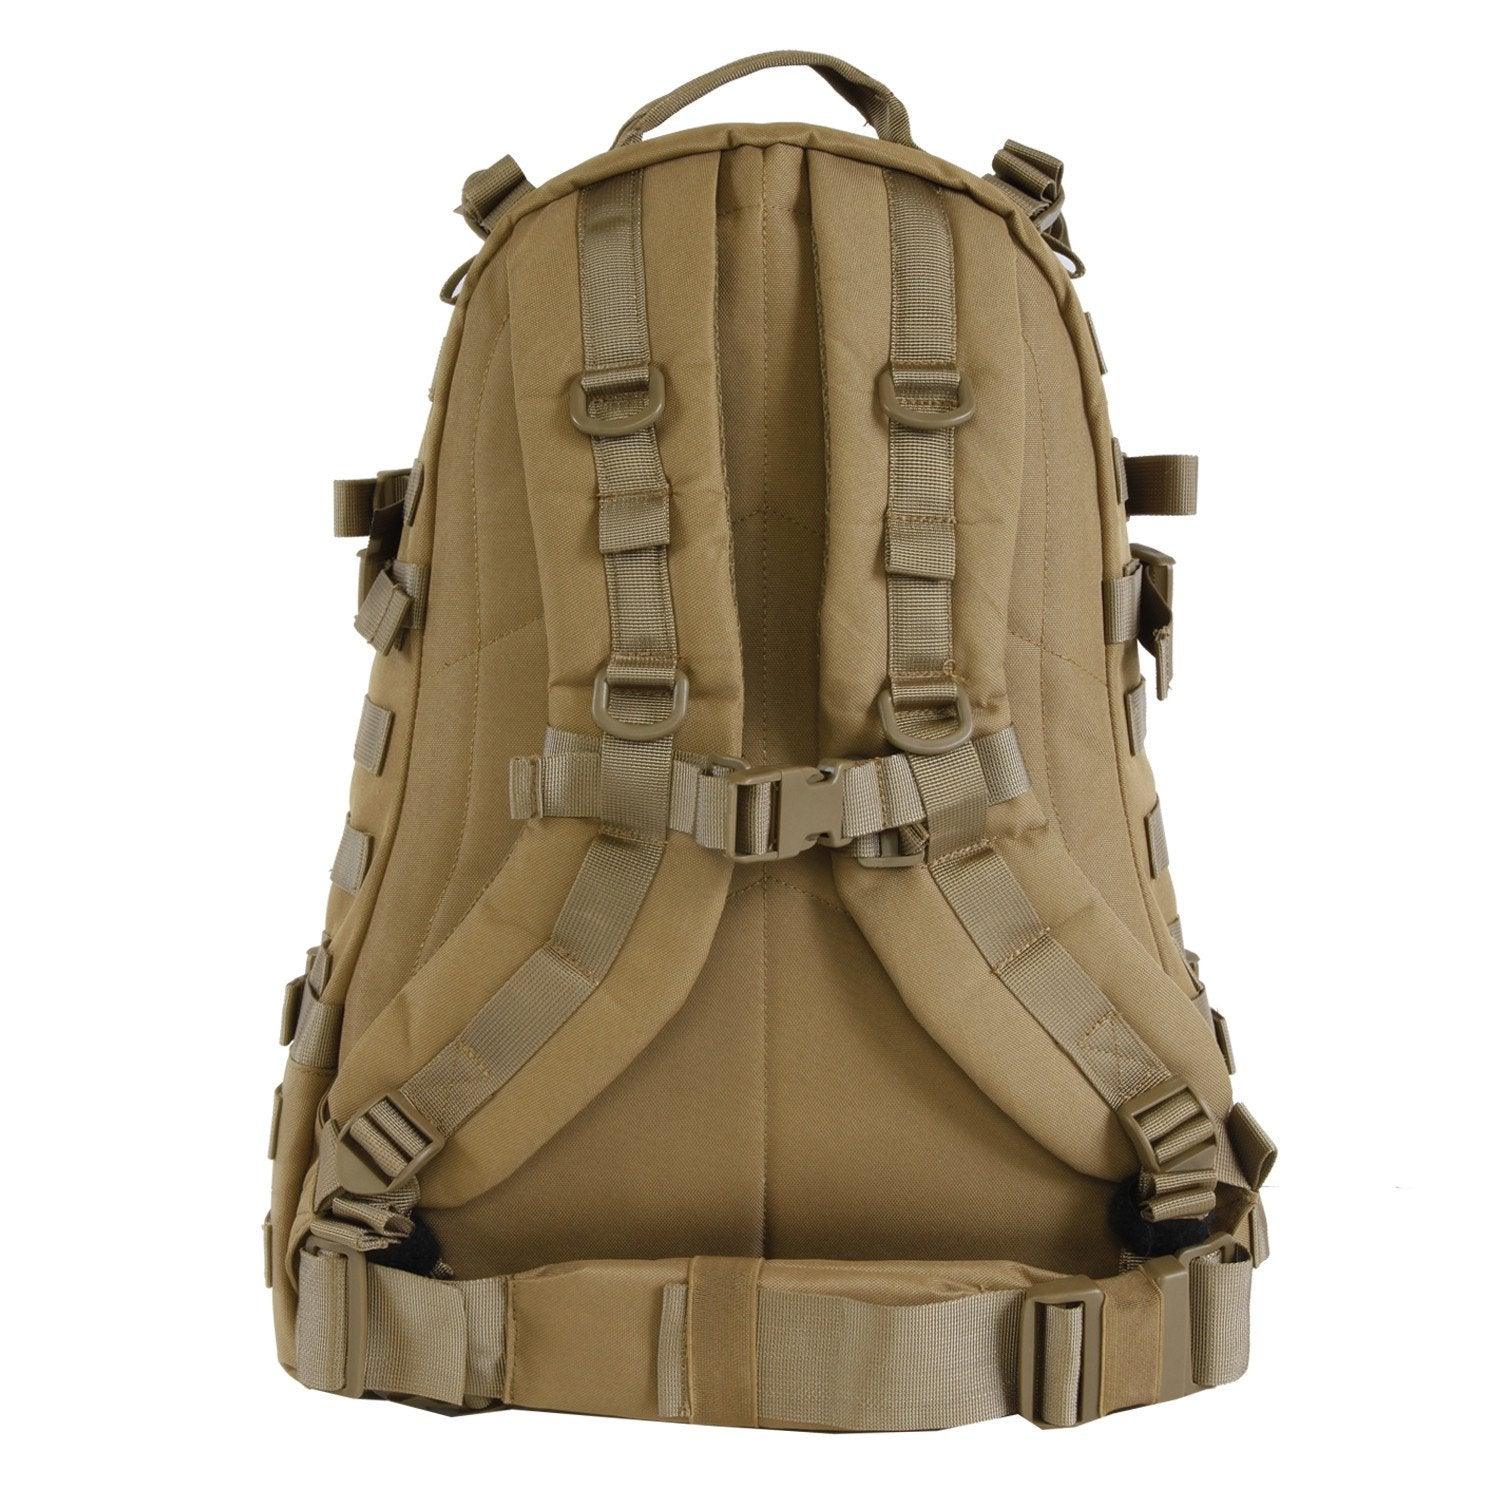 Stealth Tactical 3 Day Pack | Tactical Backpack | Hiking Backpack